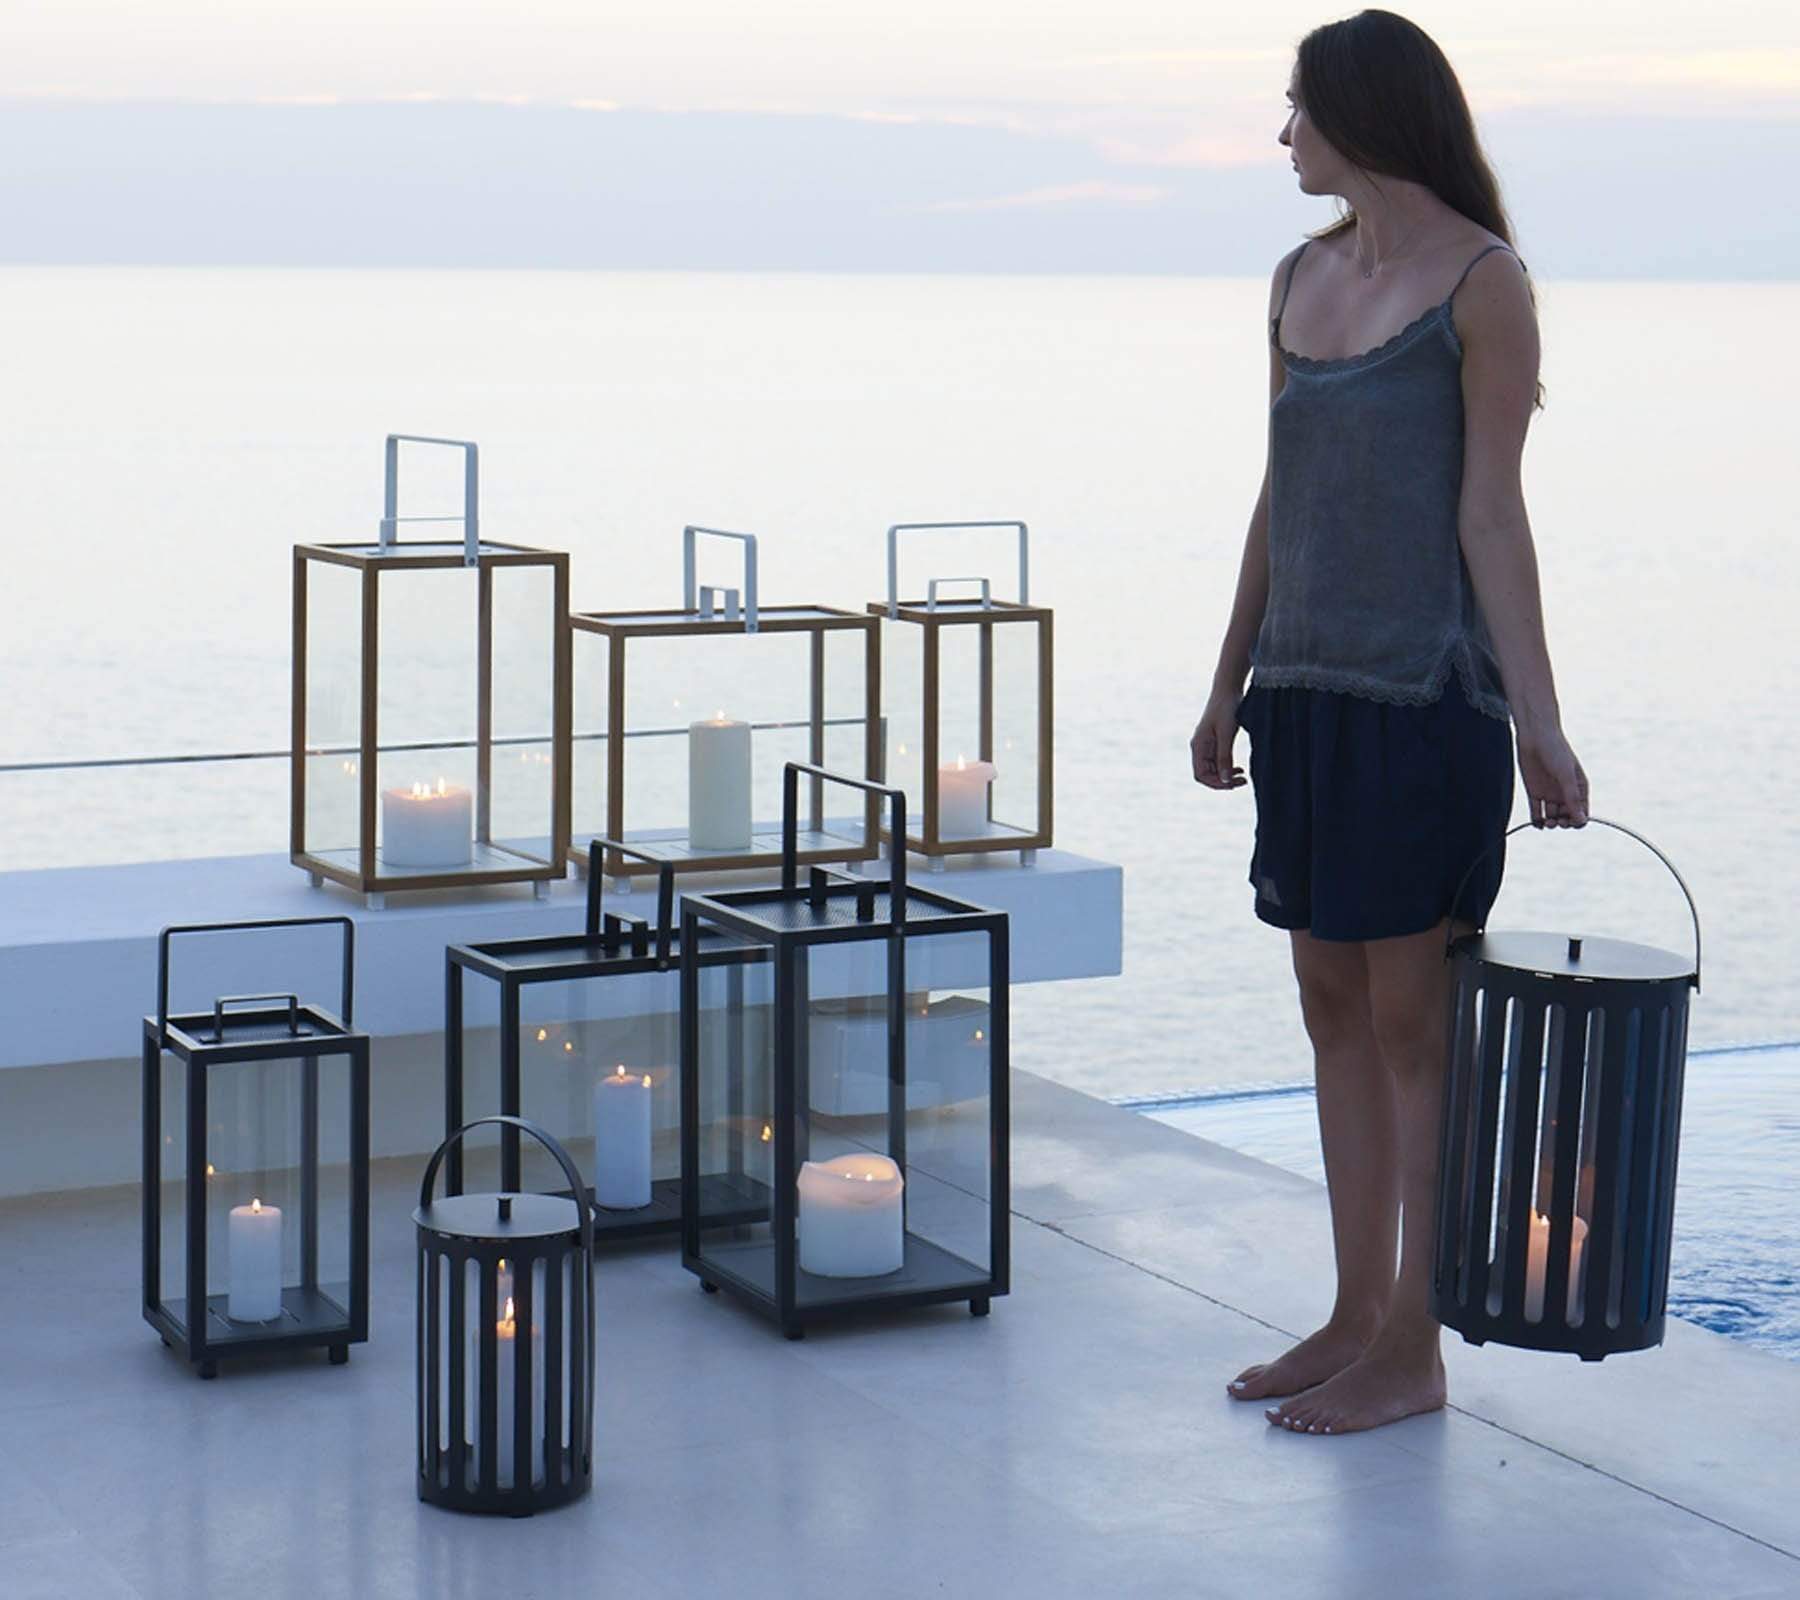 Boxhill's Lighttube Outdoor Large Lantern | Set of 2 lifestyle image with Lighthouse Outdoor Large Aluminum Lantern and Lighthouse Outdoor Large Teak Lantern with a woman standing at the side carrying Lighttube Outdoor Large Lantern